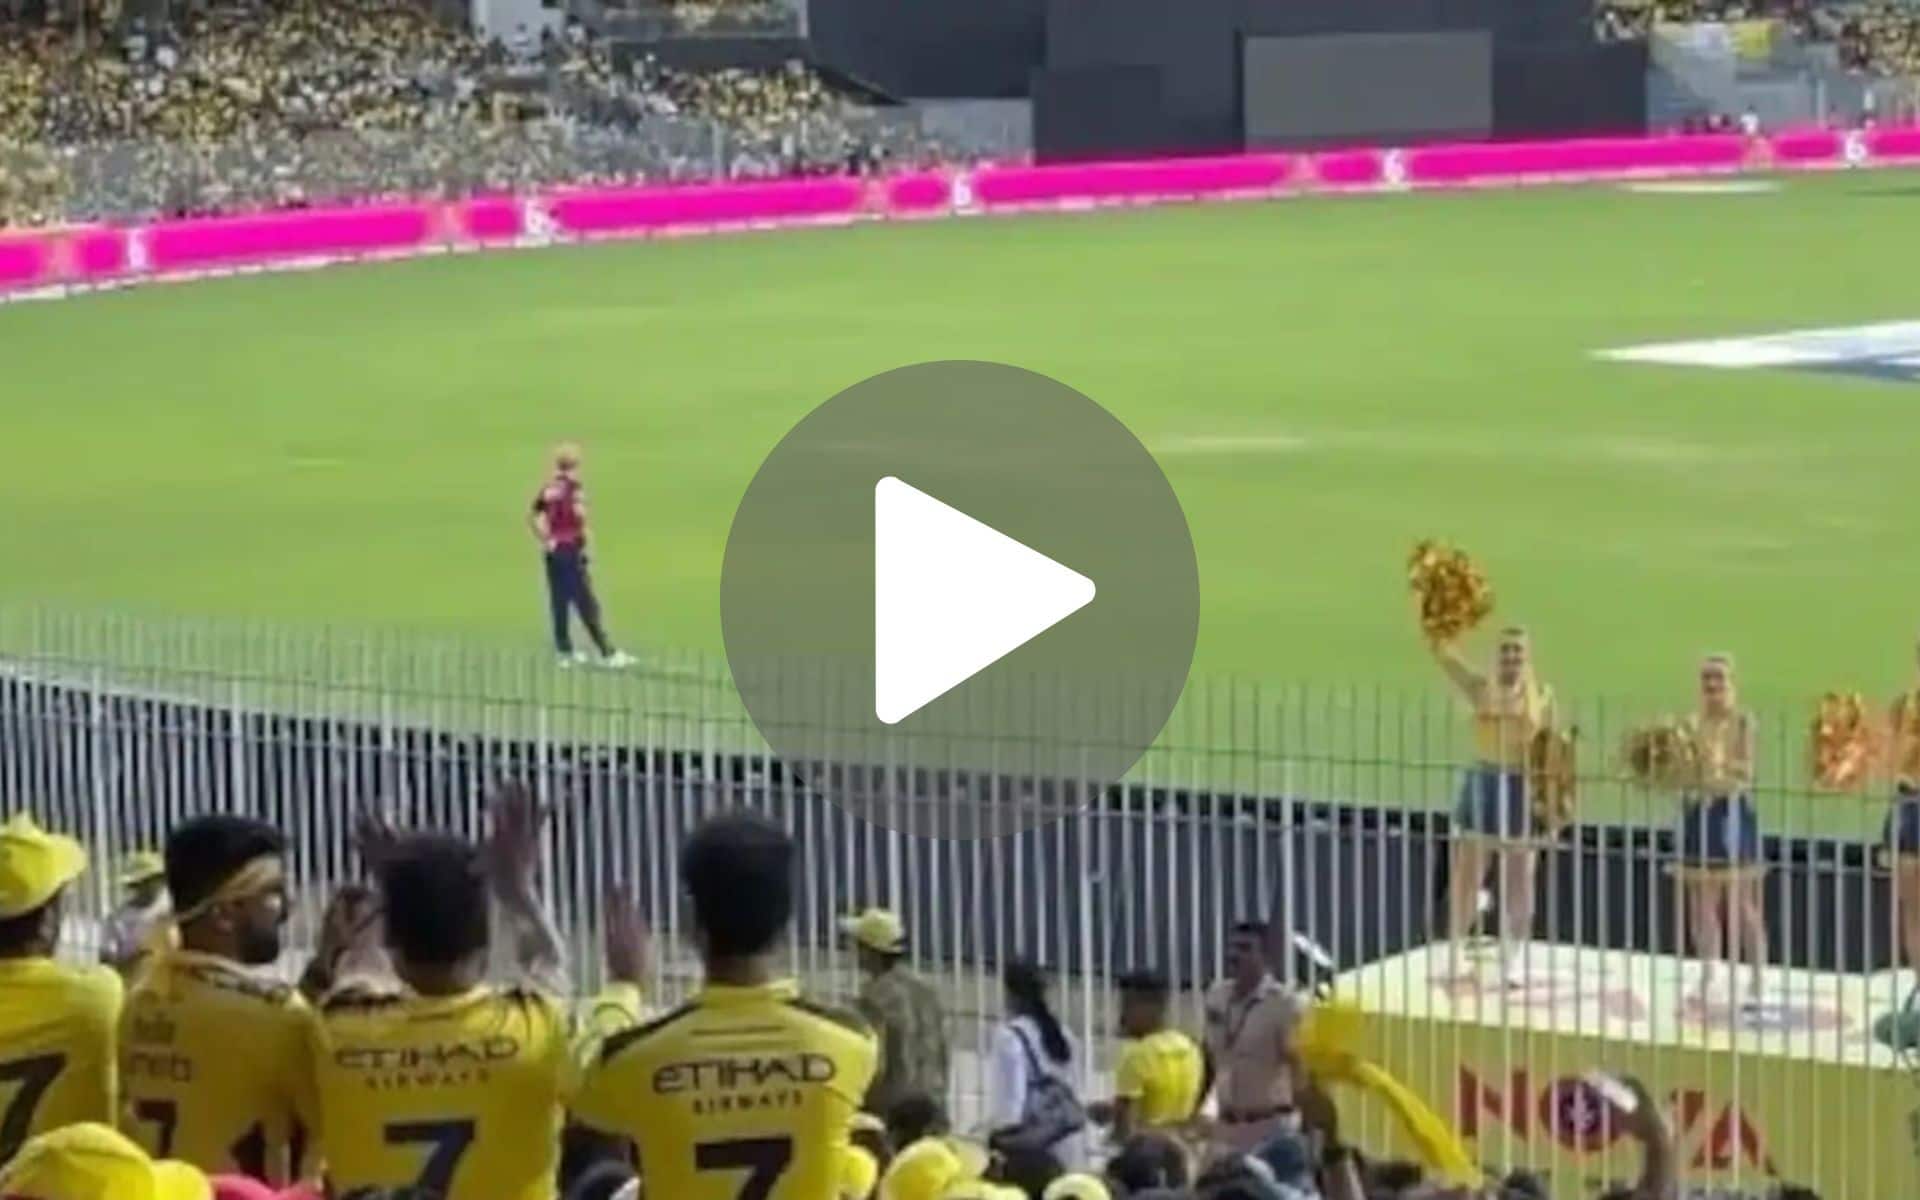 [Watch] CSK Fans 'Shake A Leg' With Cheerleaders In Chennai; Video Goes Viral